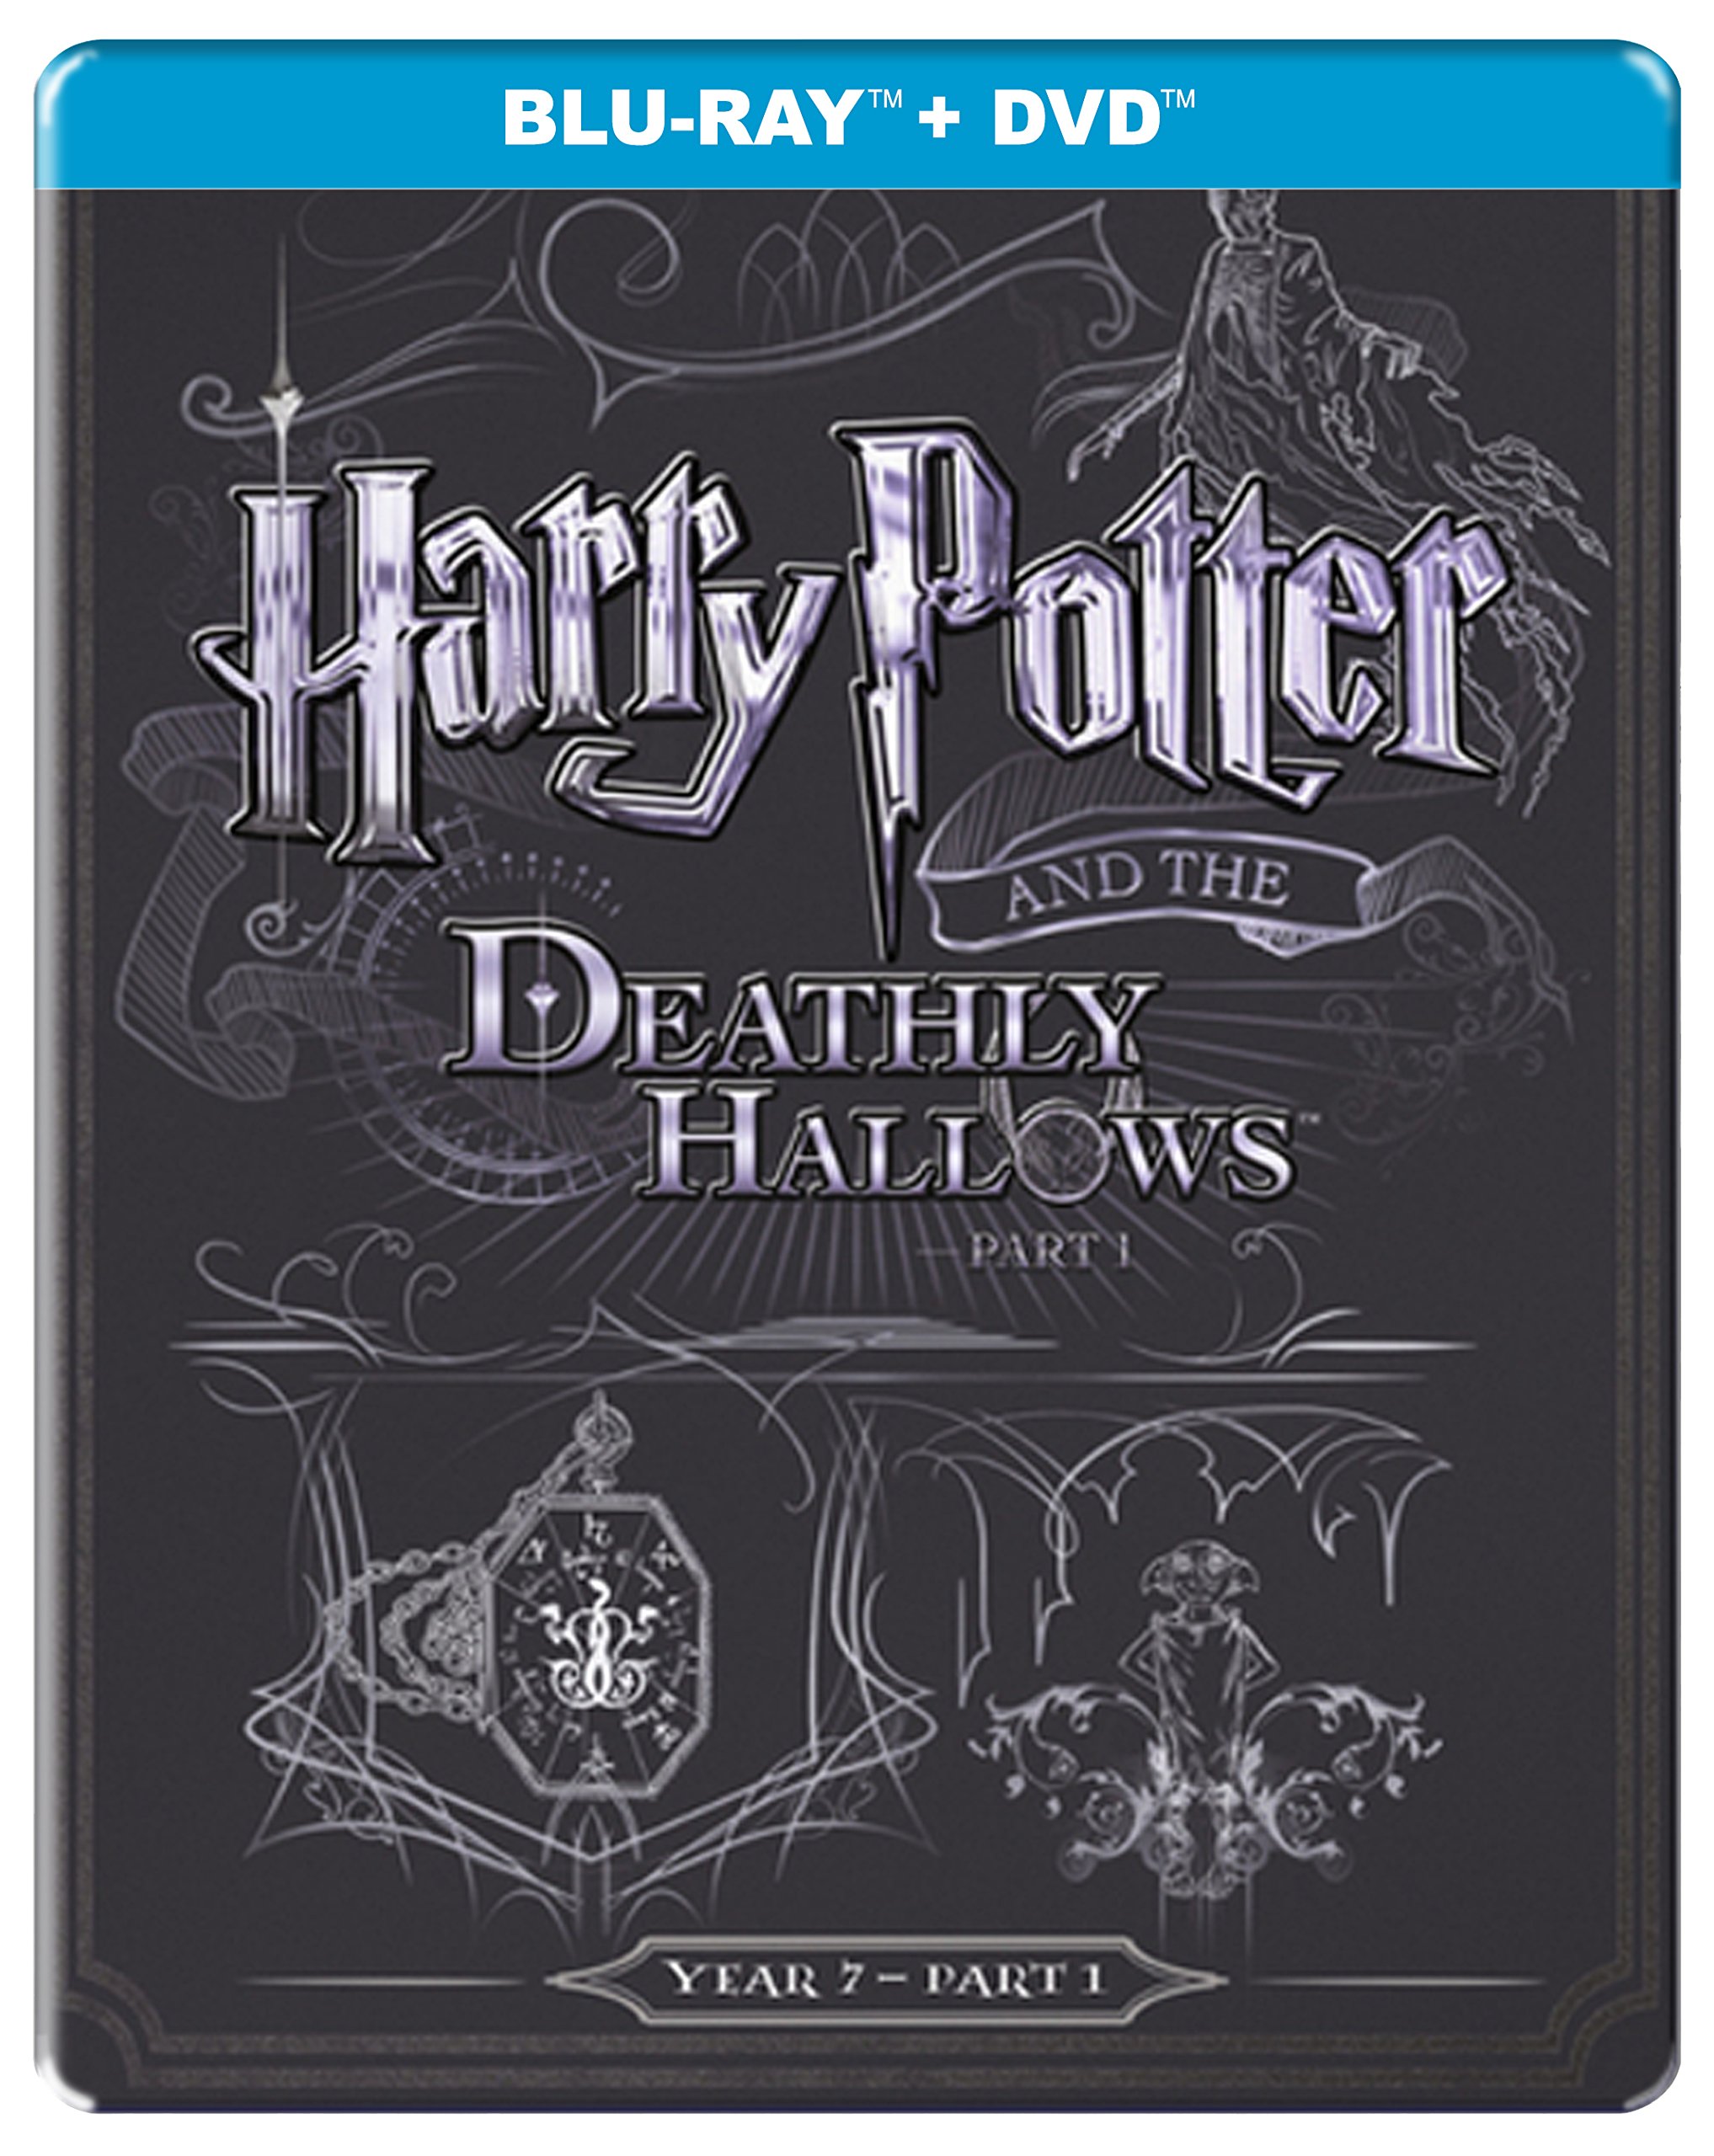 harry-potter-and-the-deathly-hallows-part-1-2010-year-7-steelbook-blu-ray-dvd-2-disc